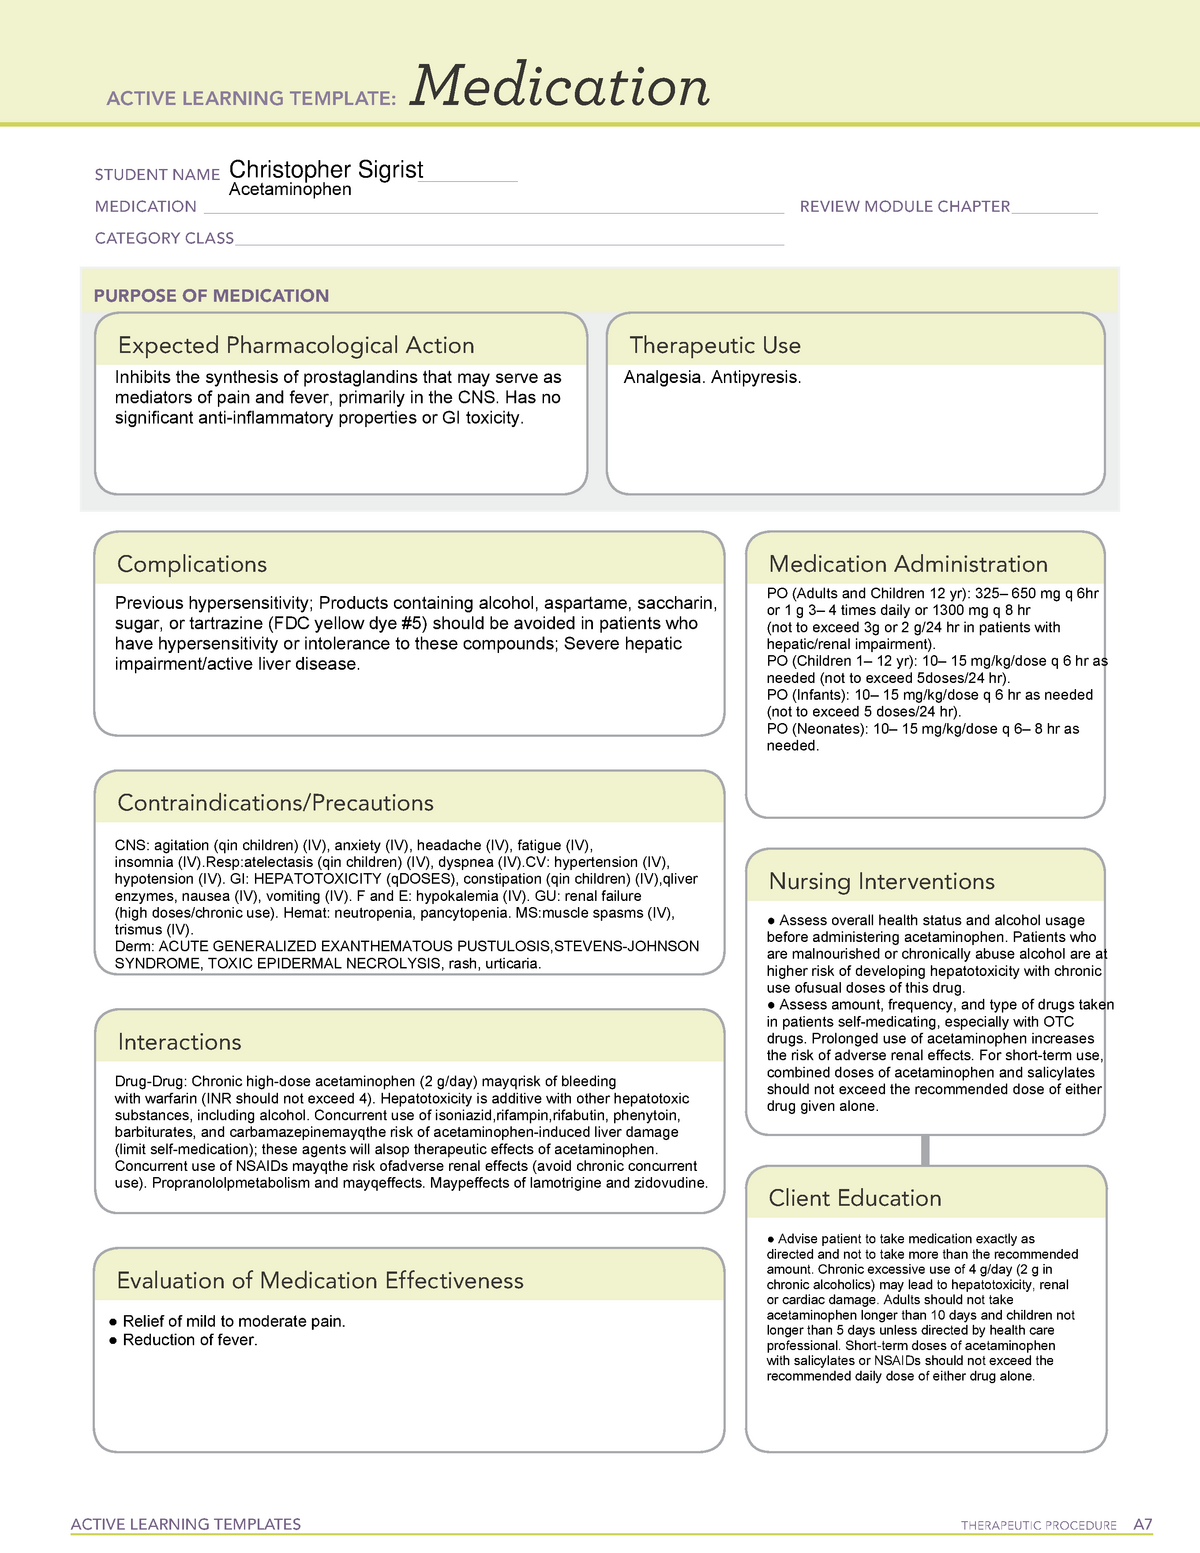 Acetaminophen Med Card ATI Template ACTIVE LEARNING TEMPLATES